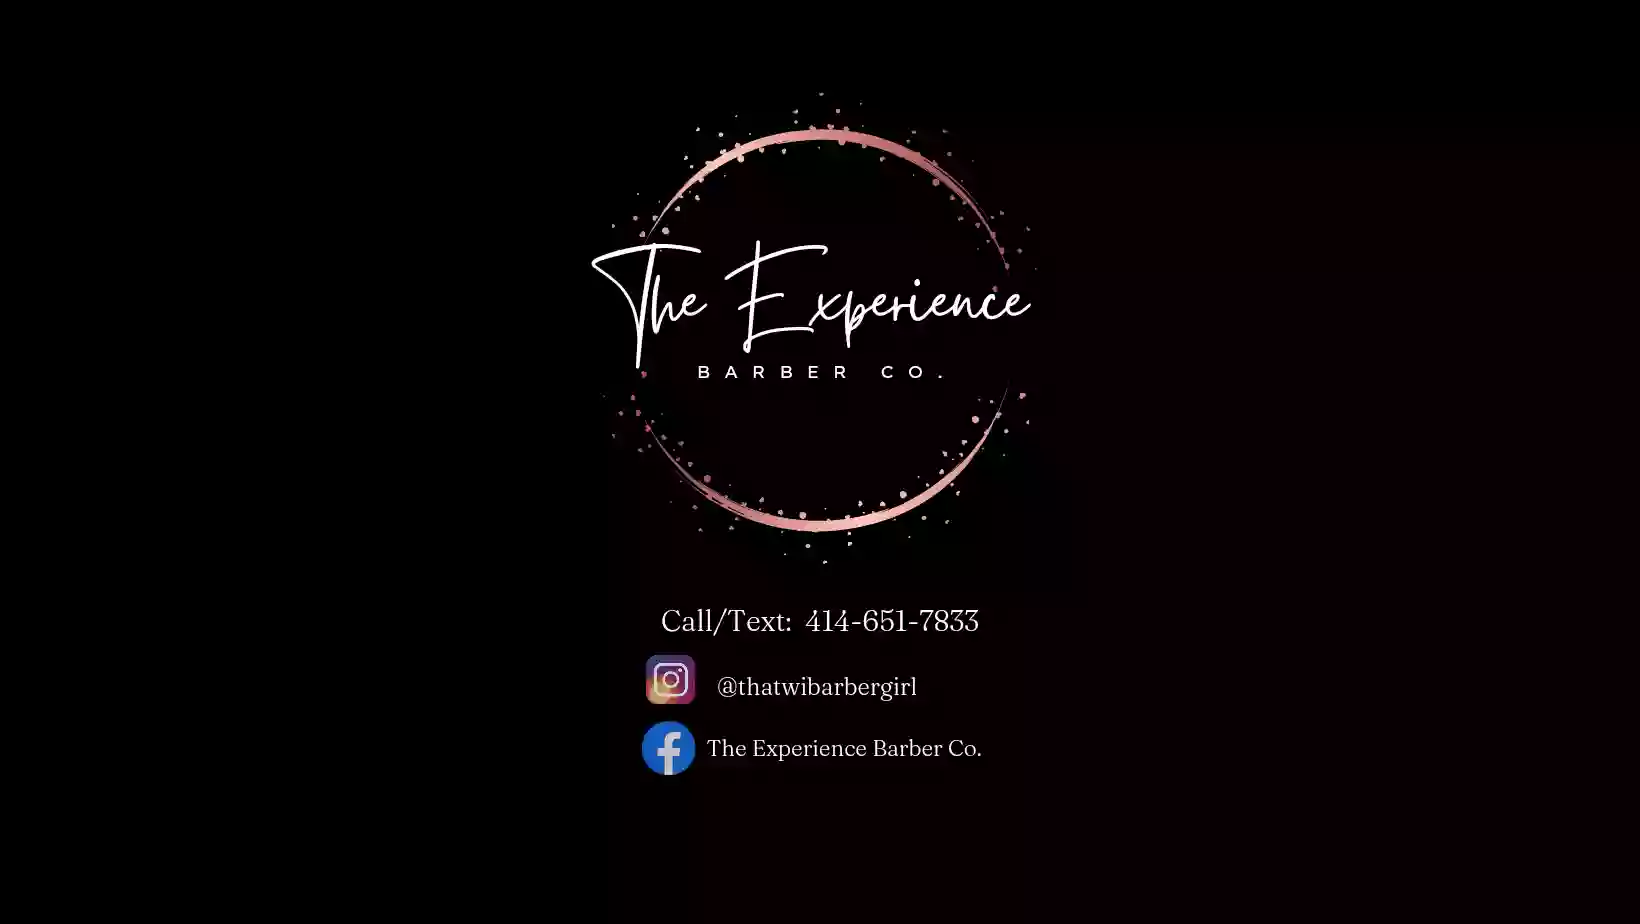 The Experience Barber Co.